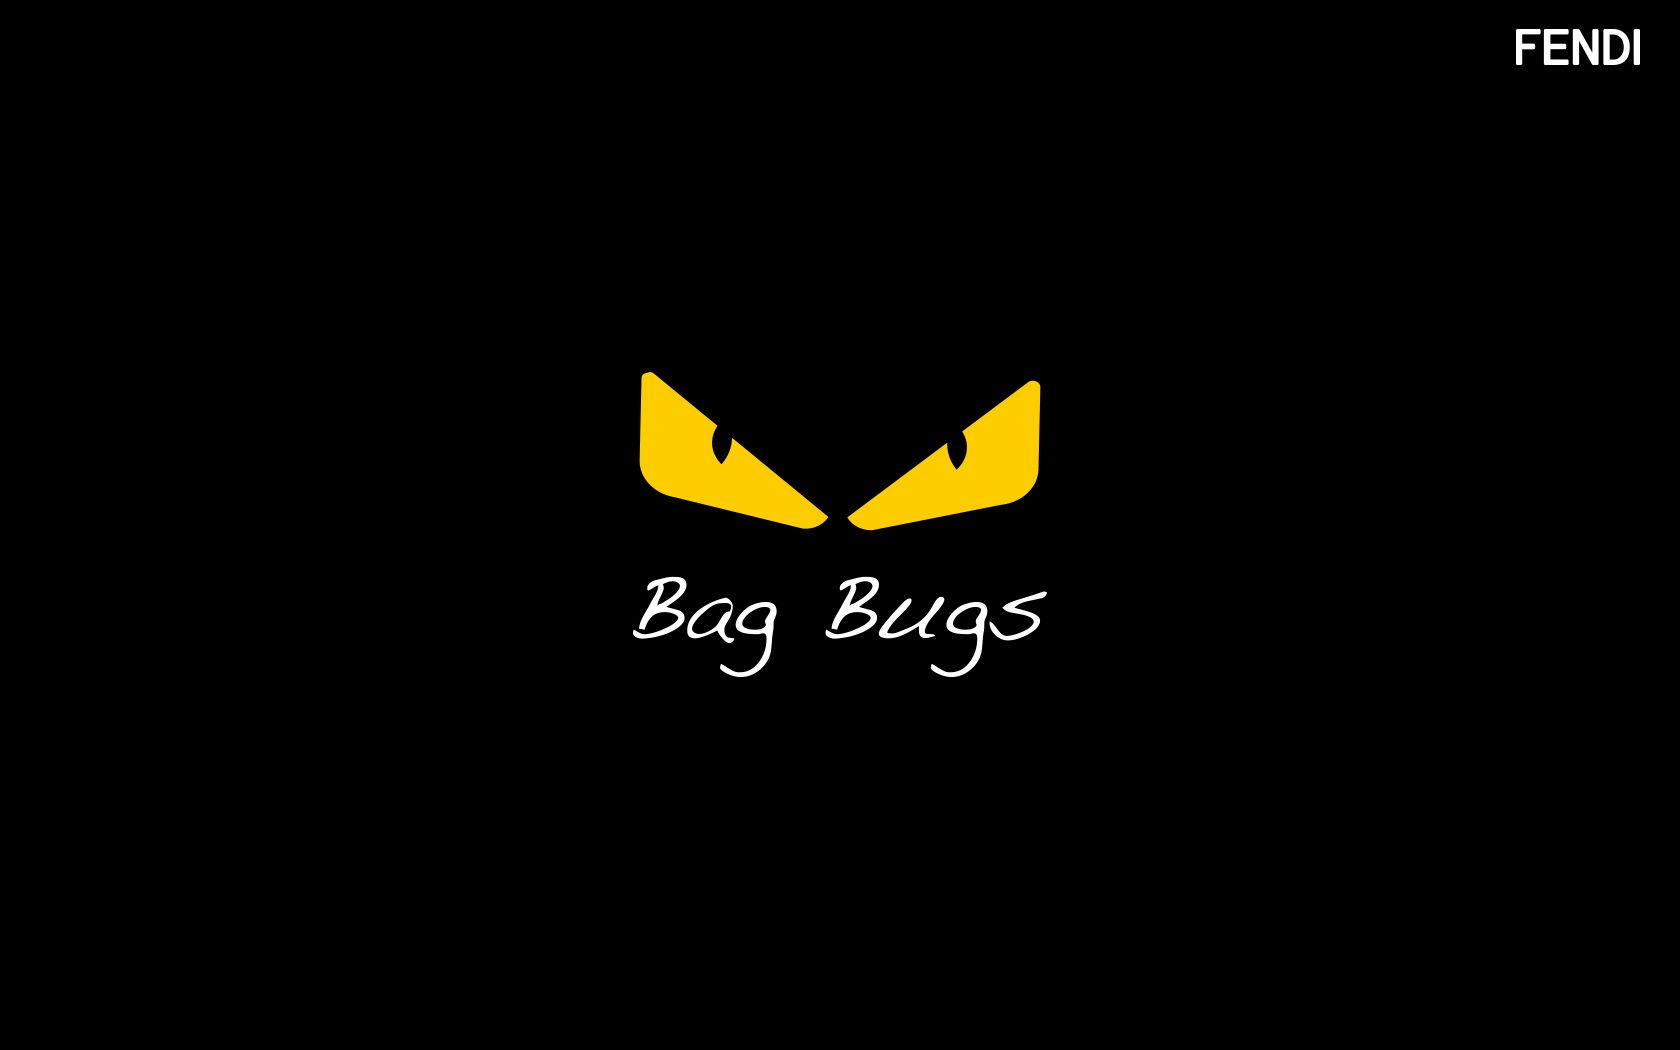 Join The Bag Bags Mania And Your Bugged Wallpaper